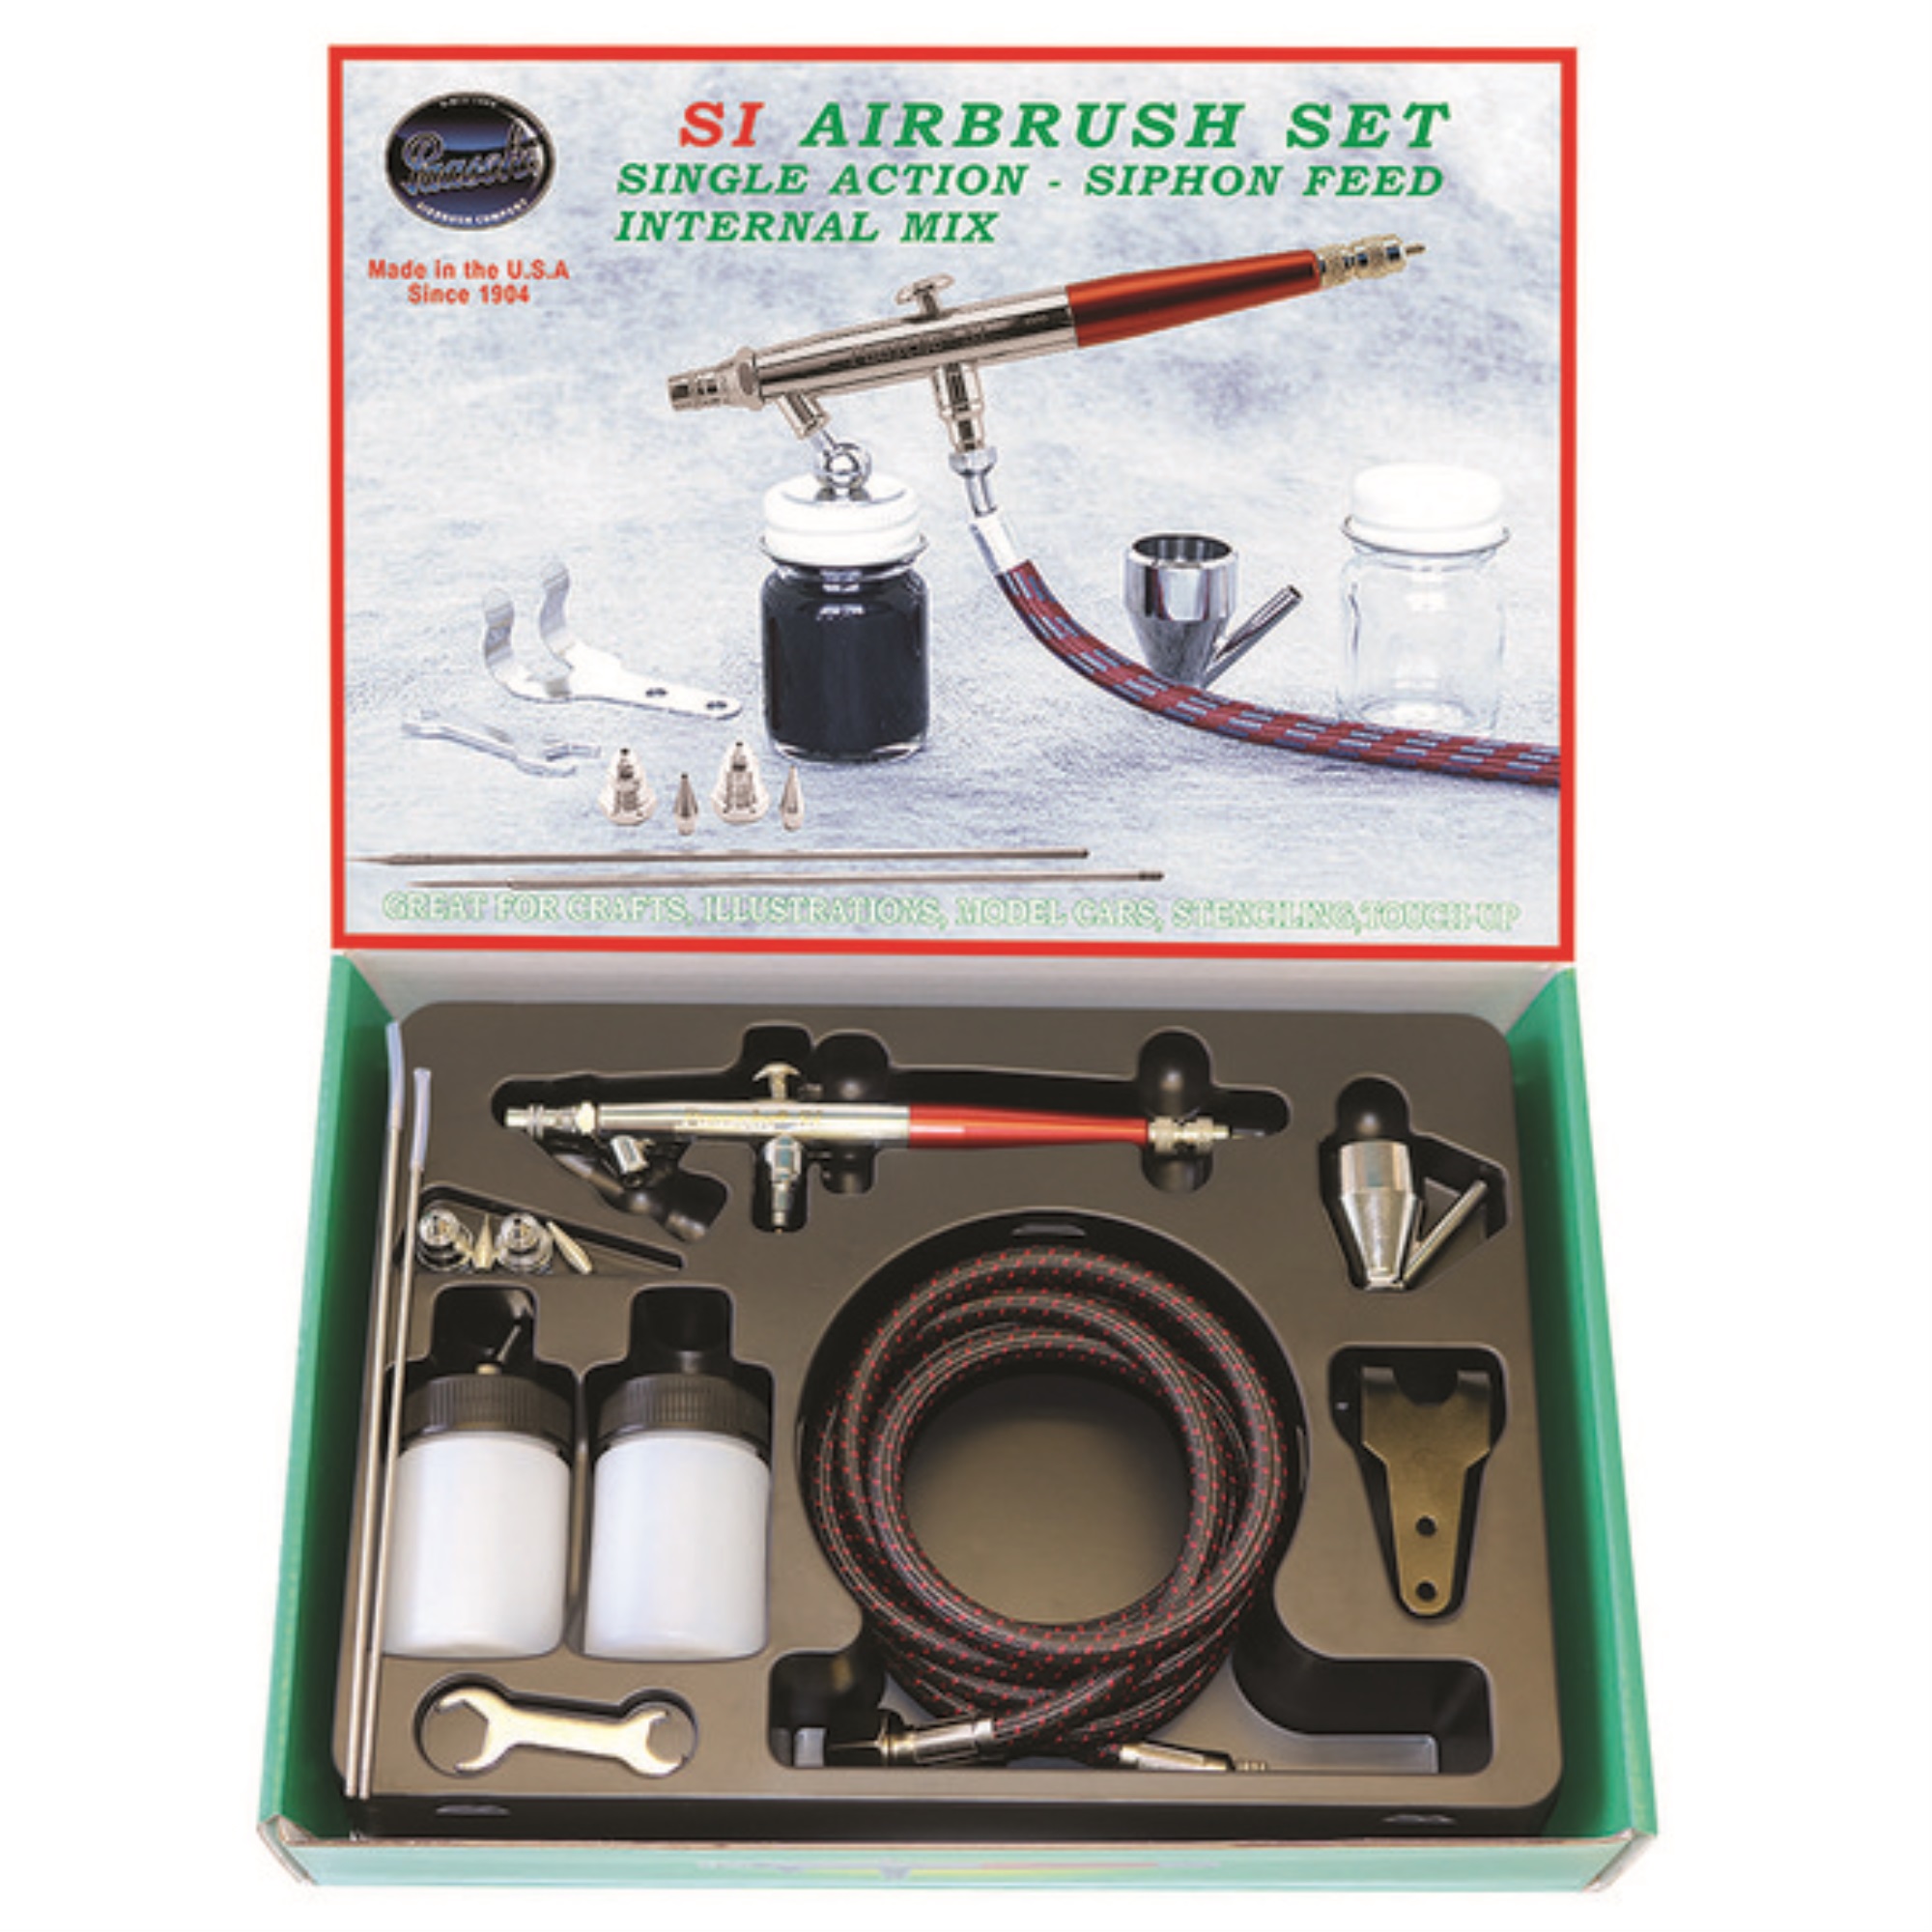 Paasche Airbrush Single Action Internal Mix Set with all three heads